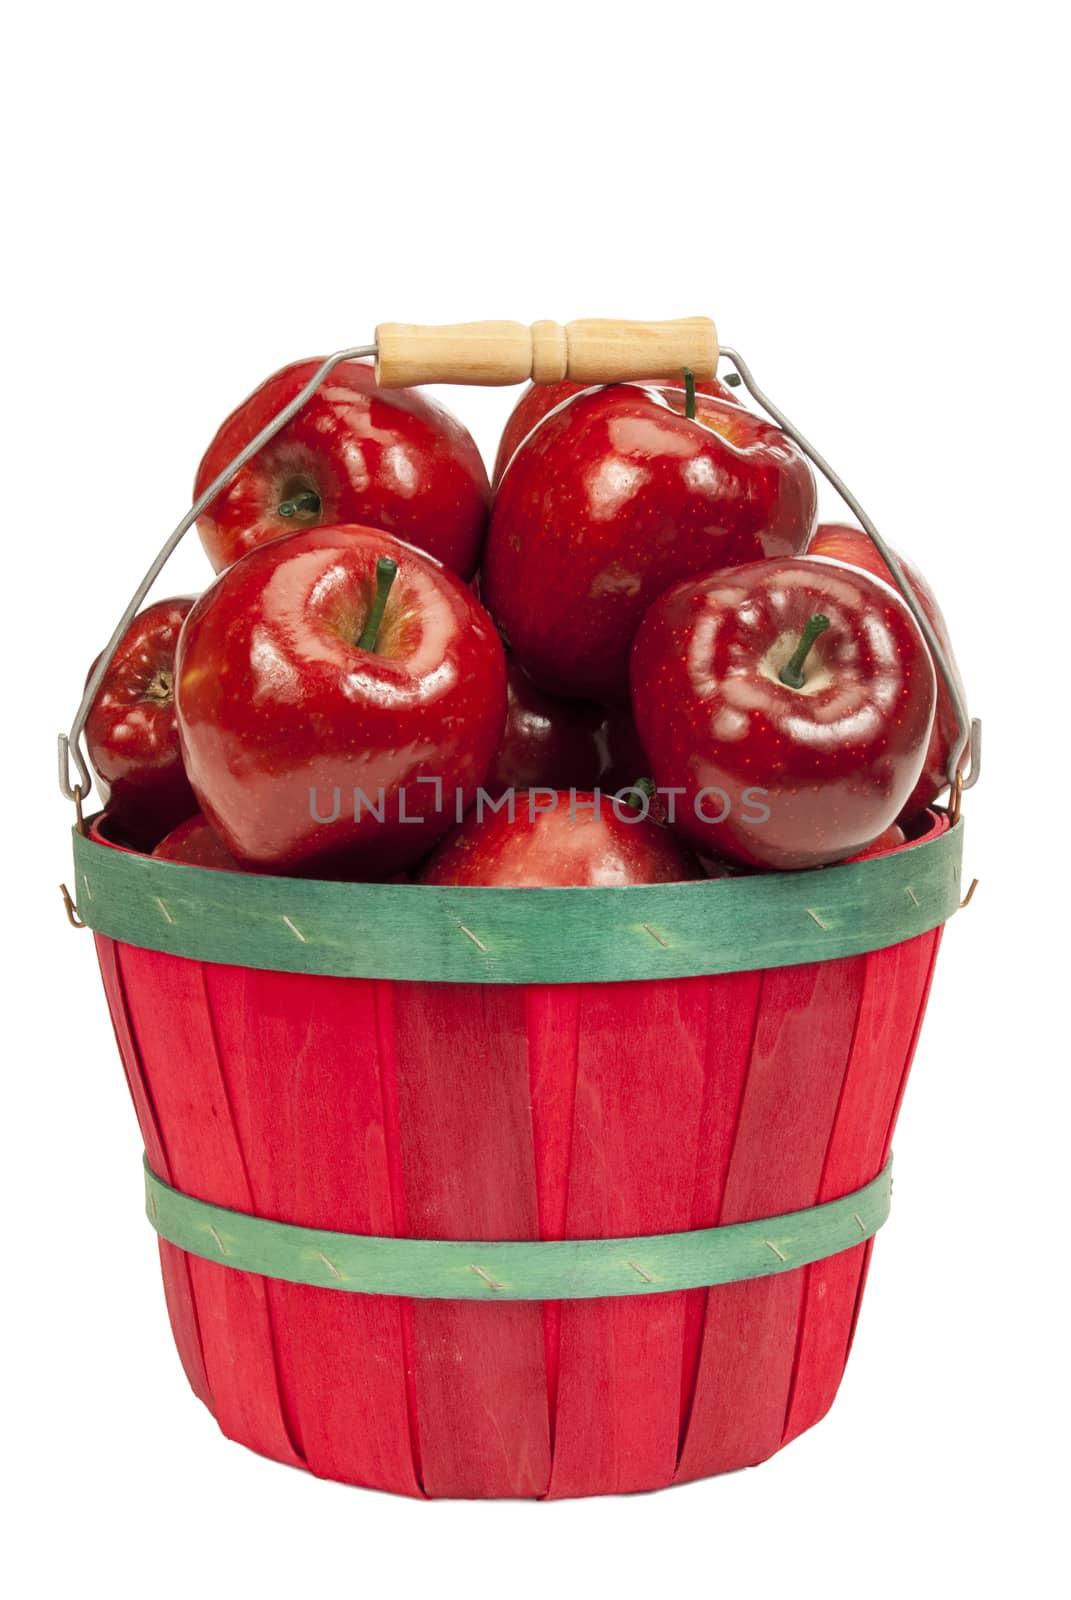 Vertical shot of a cute little red basket full of delicious red apples on a white background.